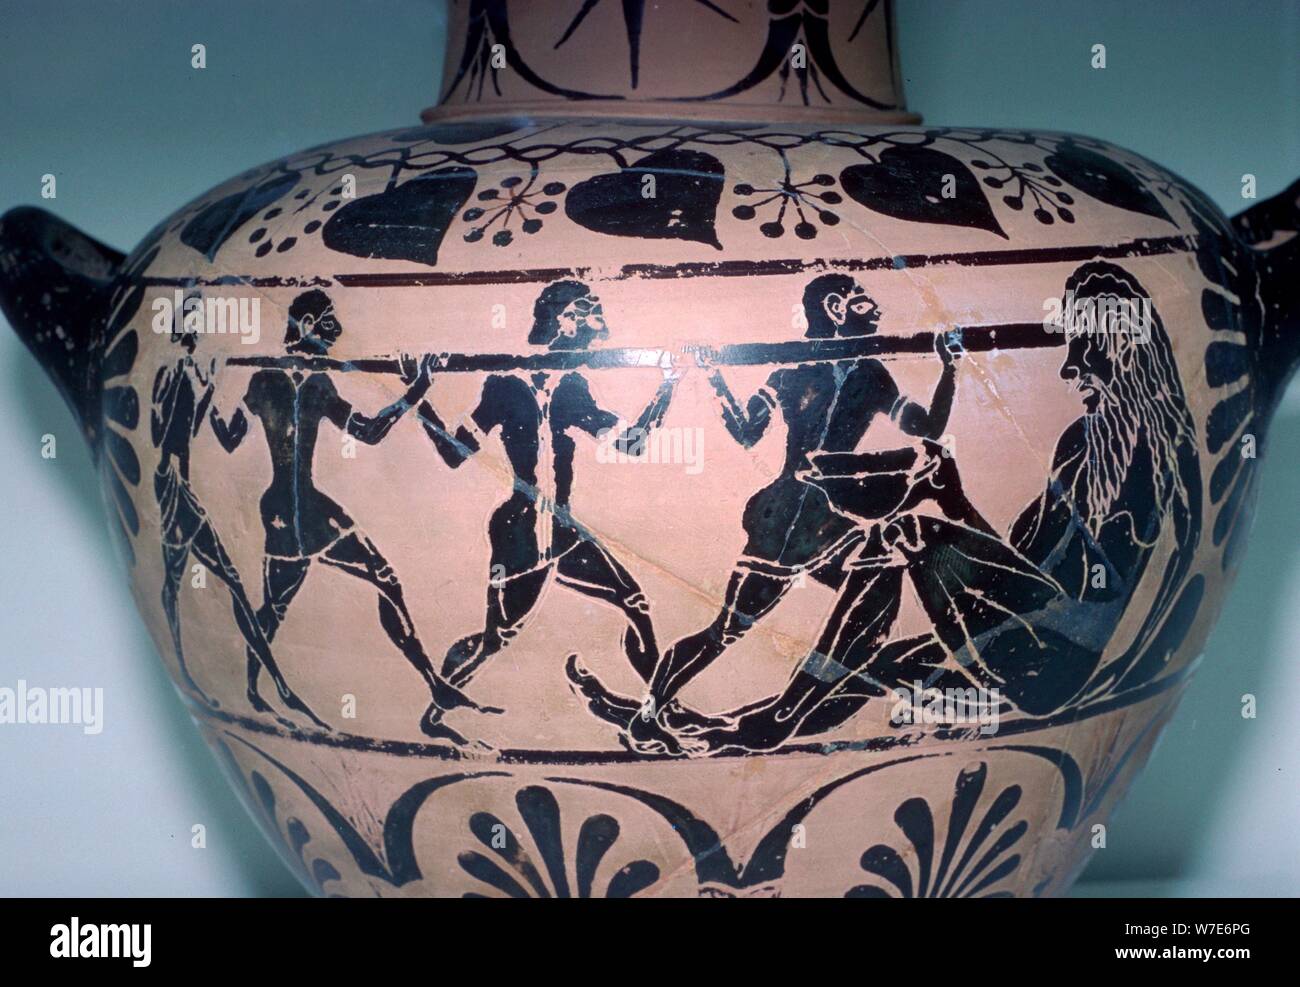 Vase-painting of the story of the Cyclops from the 'Odyssey'. Artist: Unknown Stock Photo